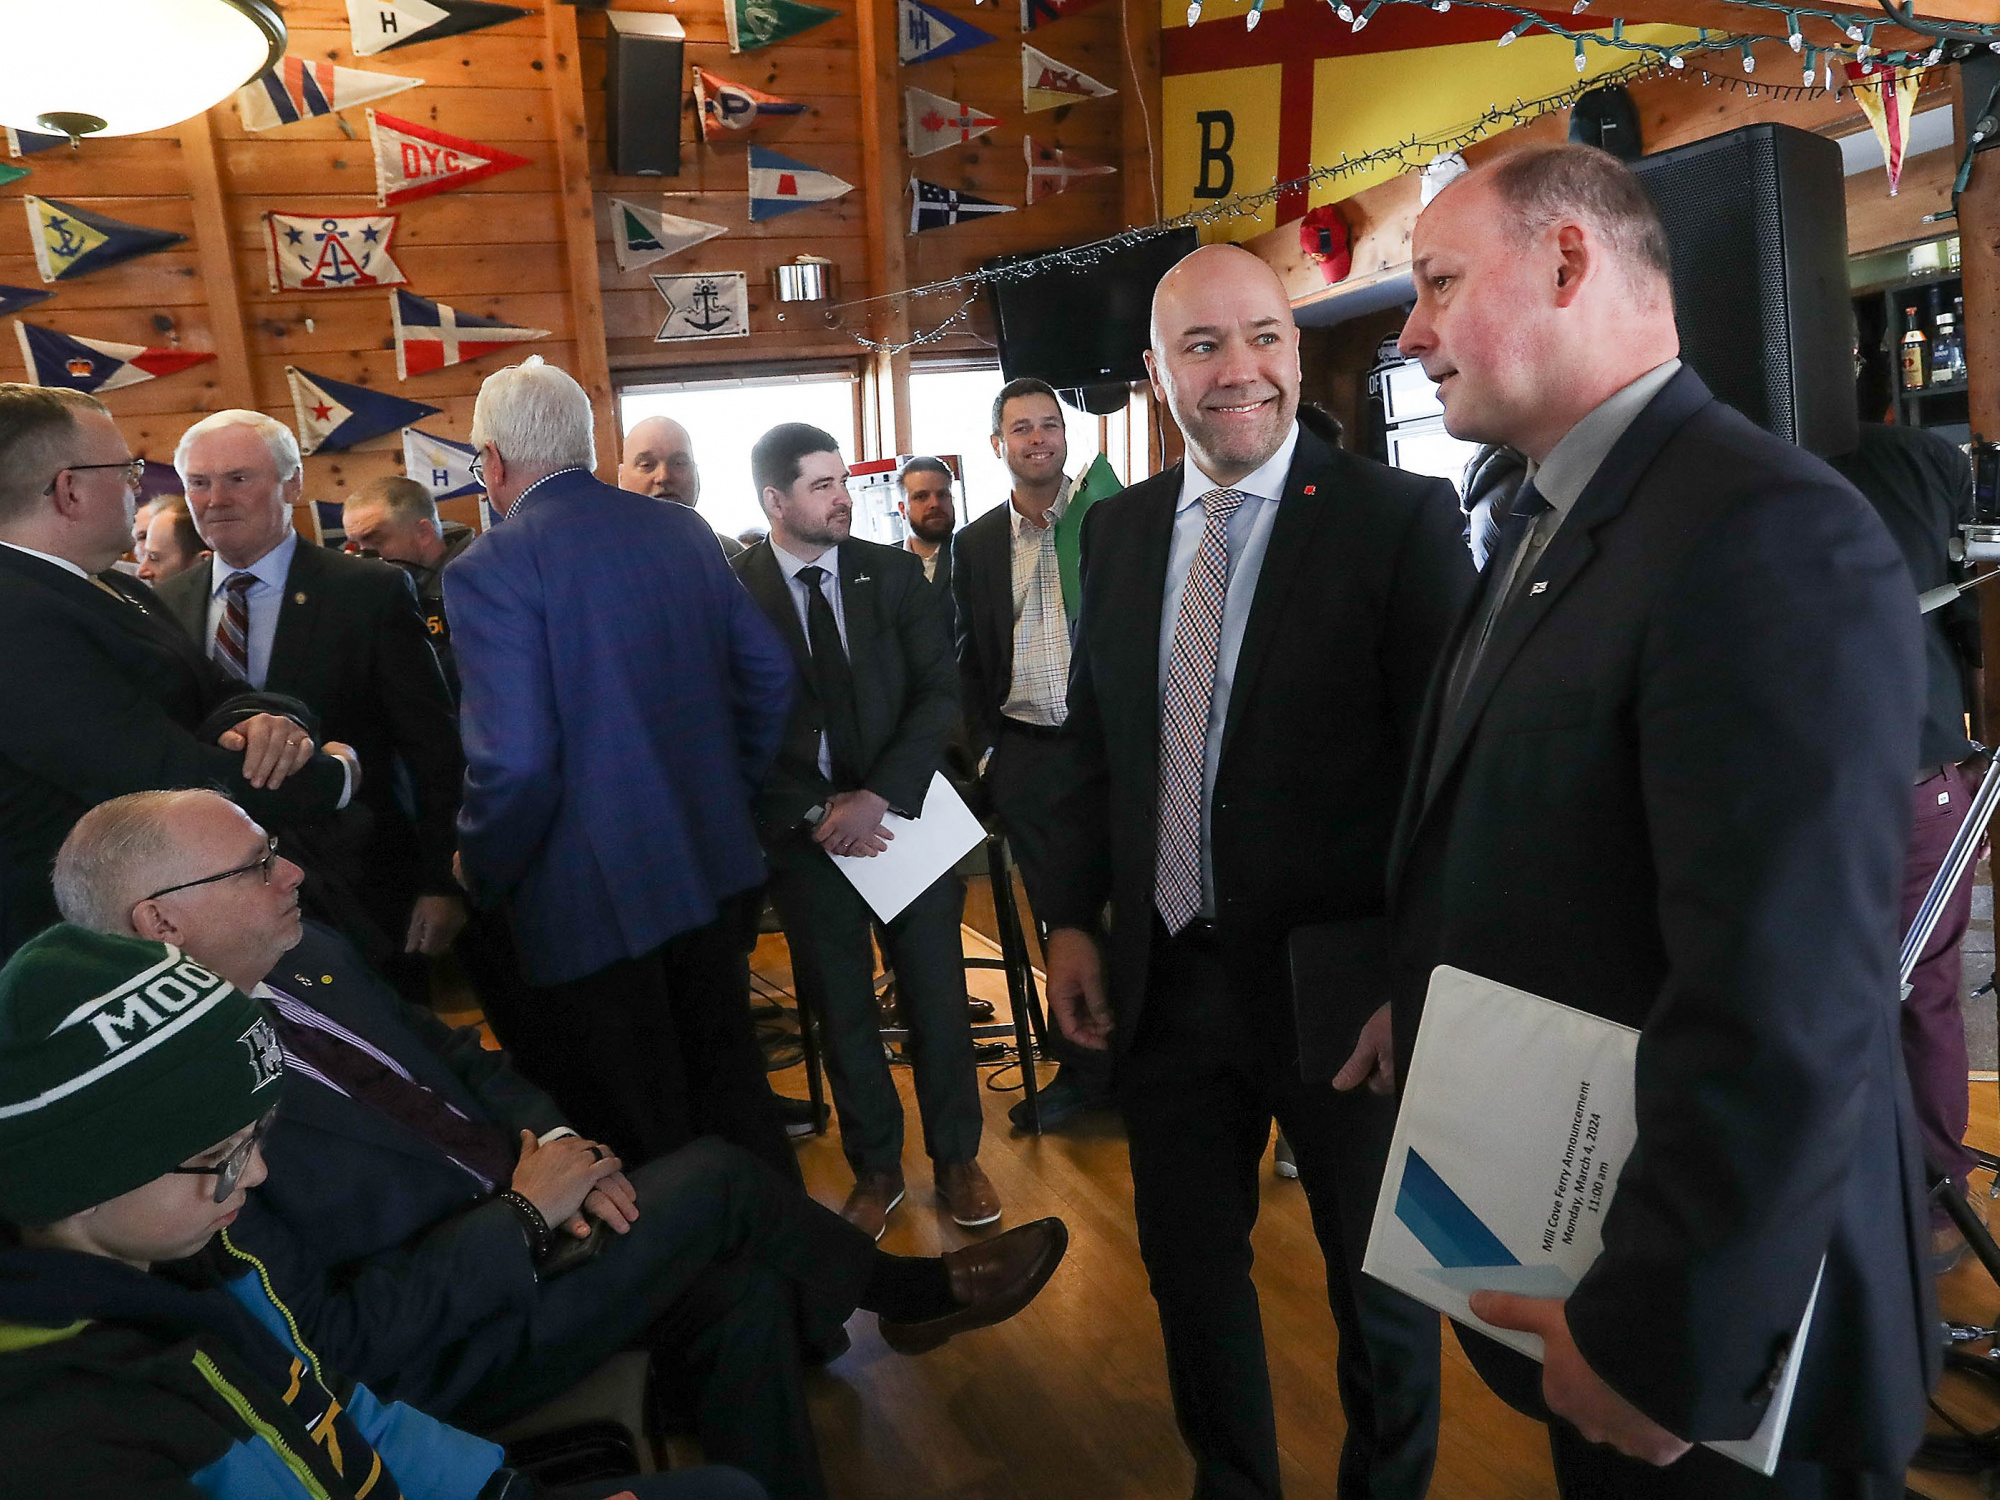 Environment and Climate Change Minister Timothy Halman speaks with guests at the Bedford Basin Yacht Club after a funding announcement for the new Mill Cove to Halifax ferry service